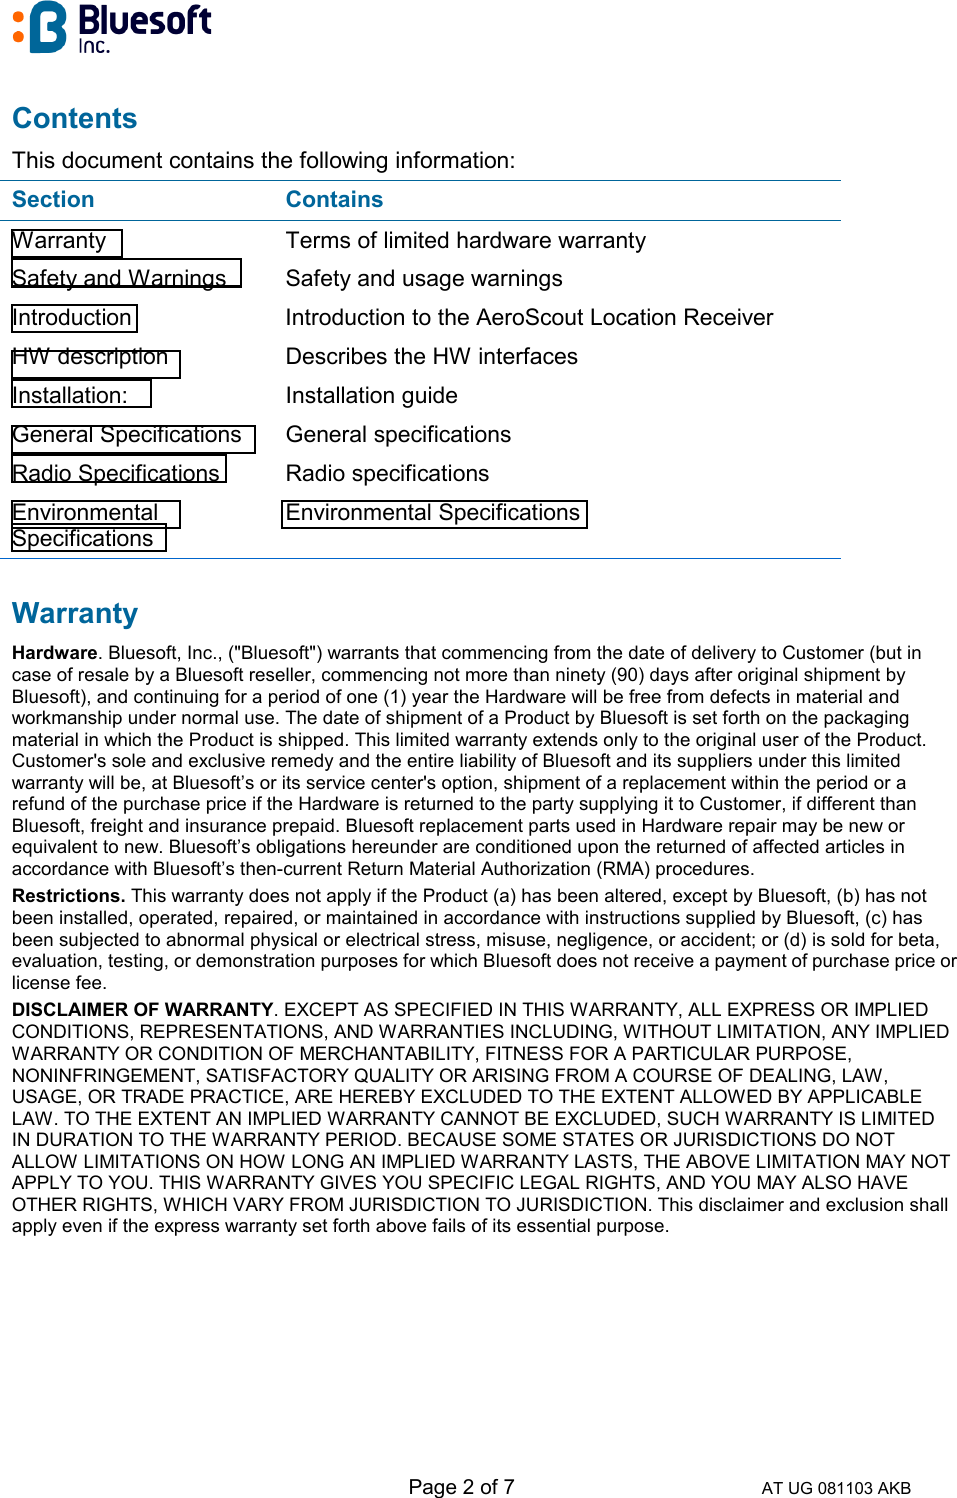   Page 2 of 7 AT UG 081103 AKB Contents This document contains the following information: Section Contains Warranty  Terms of limited hardware warranty Safety and Warnings  Safety and usage warnings Introduction  Introduction to the AeroScout Location Receiver HW description  Describes the HW interfaces Installation: Installation guide General Specifications  General specifications Radio Specifications  Radio specifications Environmental Specifications Environmental Specifications Warranty Hardware. Bluesoft, Inc., (&quot;Bluesoft&quot;) warrants that commencing from the date of delivery to Customer (but in case of resale by a Bluesoft reseller, commencing not more than ninety (90) days after original shipment by Bluesoft), and continuing for a period of one (1) year the Hardware will be free from defects in material and workmanship under normal use. The date of shipment of a Product by Bluesoft is set forth on the packaging material in which the Product is shipped. This limited warranty extends only to the original user of the Product. Customer&apos;s sole and exclusive remedy and the entire liability of Bluesoft and its suppliers under this limited warranty will be, at Bluesoft’s or its service center&apos;s option, shipment of a replacement within the period or a refund of the purchase price if the Hardware is returned to the party supplying it to Customer, if different than Bluesoft, freight and insurance prepaid. Bluesoft replacement parts used in Hardware repair may be new or equivalent to new. Bluesoft’s obligations hereunder are conditioned upon the returned of affected articles in accordance with Bluesoft’s then-current Return Material Authorization (RMA) procedures.  Restrictions. This warranty does not apply if the Product (a) has been altered, except by Bluesoft, (b) has not been installed, operated, repaired, or maintained in accordance with instructions supplied by Bluesoft, (c) has been subjected to abnormal physical or electrical stress, misuse, negligence, or accident; or (d) is sold for beta, evaluation, testing, or demonstration purposes for which Bluesoft does not receive a payment of purchase price or license fee.  DISCLAIMER OF WARRANTY. EXCEPT AS SPECIFIED IN THIS WARRANTY, ALL EXPRESS OR IMPLIED CONDITIONS, REPRESENTATIONS, AND WARRANTIES INCLUDING, WITHOUT LIMITATION, ANY IMPLIED WARRANTY OR CONDITION OF MERCHANTABILITY, FITNESS FOR A PARTICULAR PURPOSE, NONINFRINGEMENT, SATISFACTORY QUALITY OR ARISING FROM A COURSE OF DEALING, LAW, USAGE, OR TRADE PRACTICE, ARE HEREBY EXCLUDED TO THE EXTENT ALLOWED BY APPLICABLE LAW. TO THE EXTENT AN IMPLIED WARRANTY CANNOT BE EXCLUDED, SUCH WARRANTY IS LIMITED IN DURATION TO THE WARRANTY PERIOD. BECAUSE SOME STATES OR JURISDICTIONS DO NOT ALLOW LIMITATIONS ON HOW LONG AN IMPLIED WARRANTY LASTS, THE ABOVE LIMITATION MAY NOT APPLY TO YOU. THIS WARRANTY GIVES YOU SPECIFIC LEGAL RIGHTS, AND YOU MAY ALSO HAVE OTHER RIGHTS, WHICH VARY FROM JURISDICTION TO JURISDICTION. This disclaimer and exclusion shall apply even if the express warranty set forth above fails of its essential purpose.    